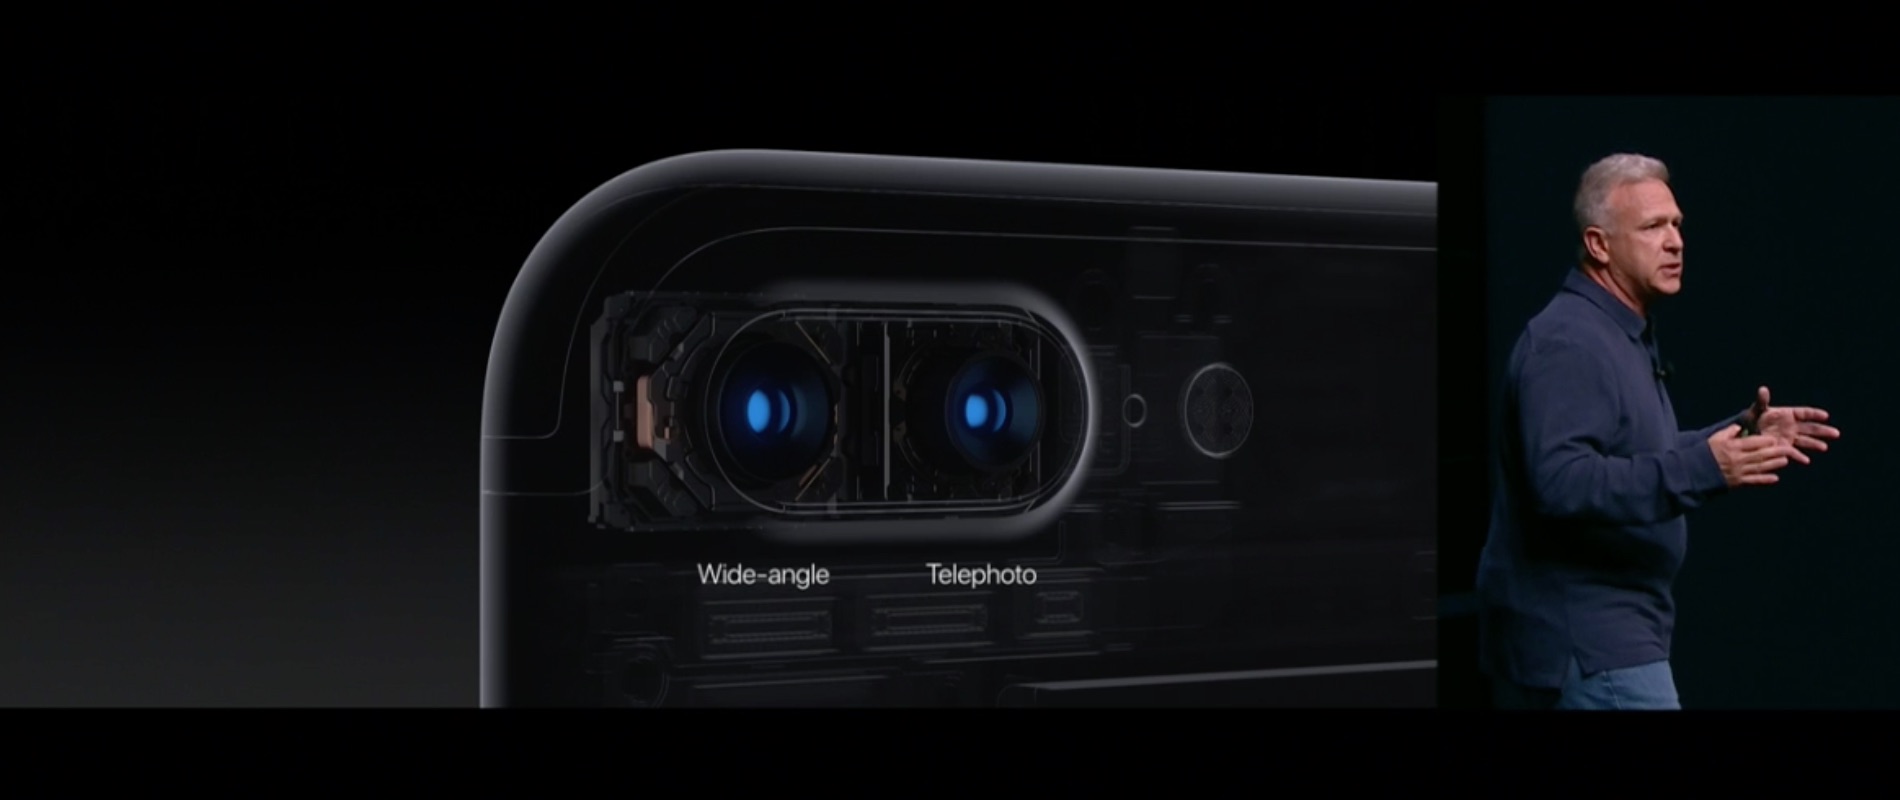 iphone7-plus-special-events-2016-sep-17